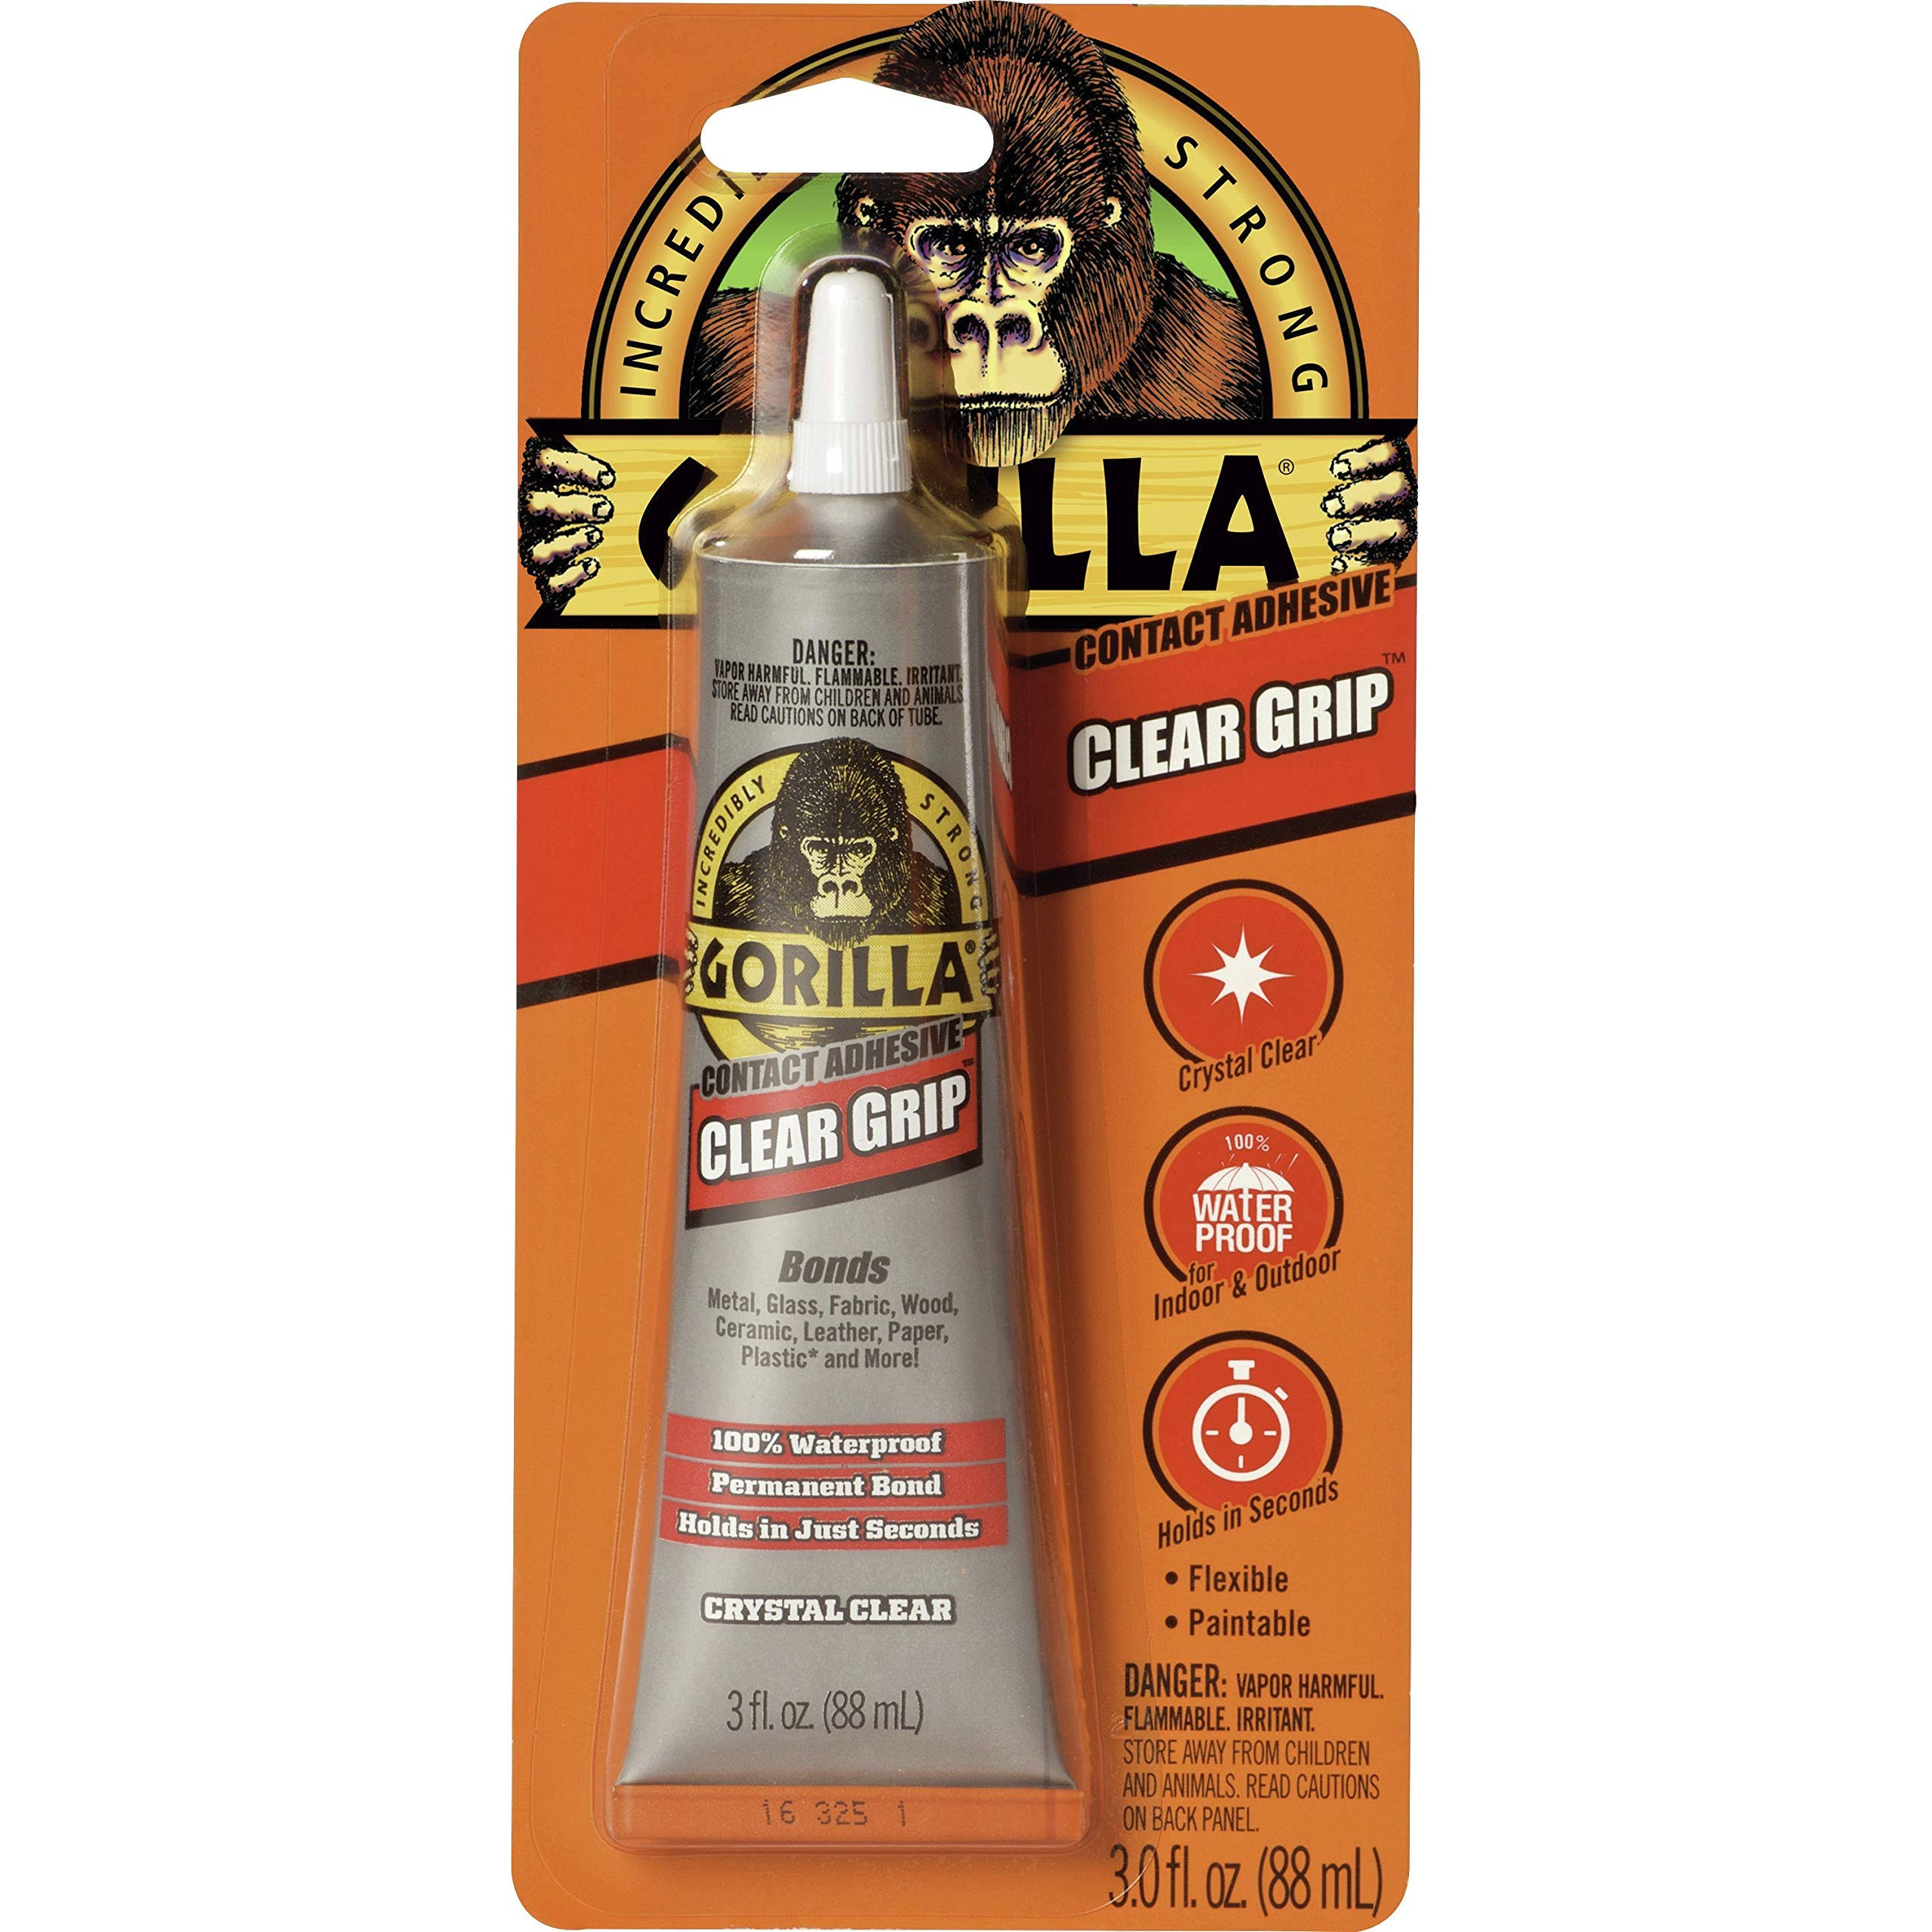 Gorilla 8040001 Clear Grip Contact Adhesive - 3oz, Clear